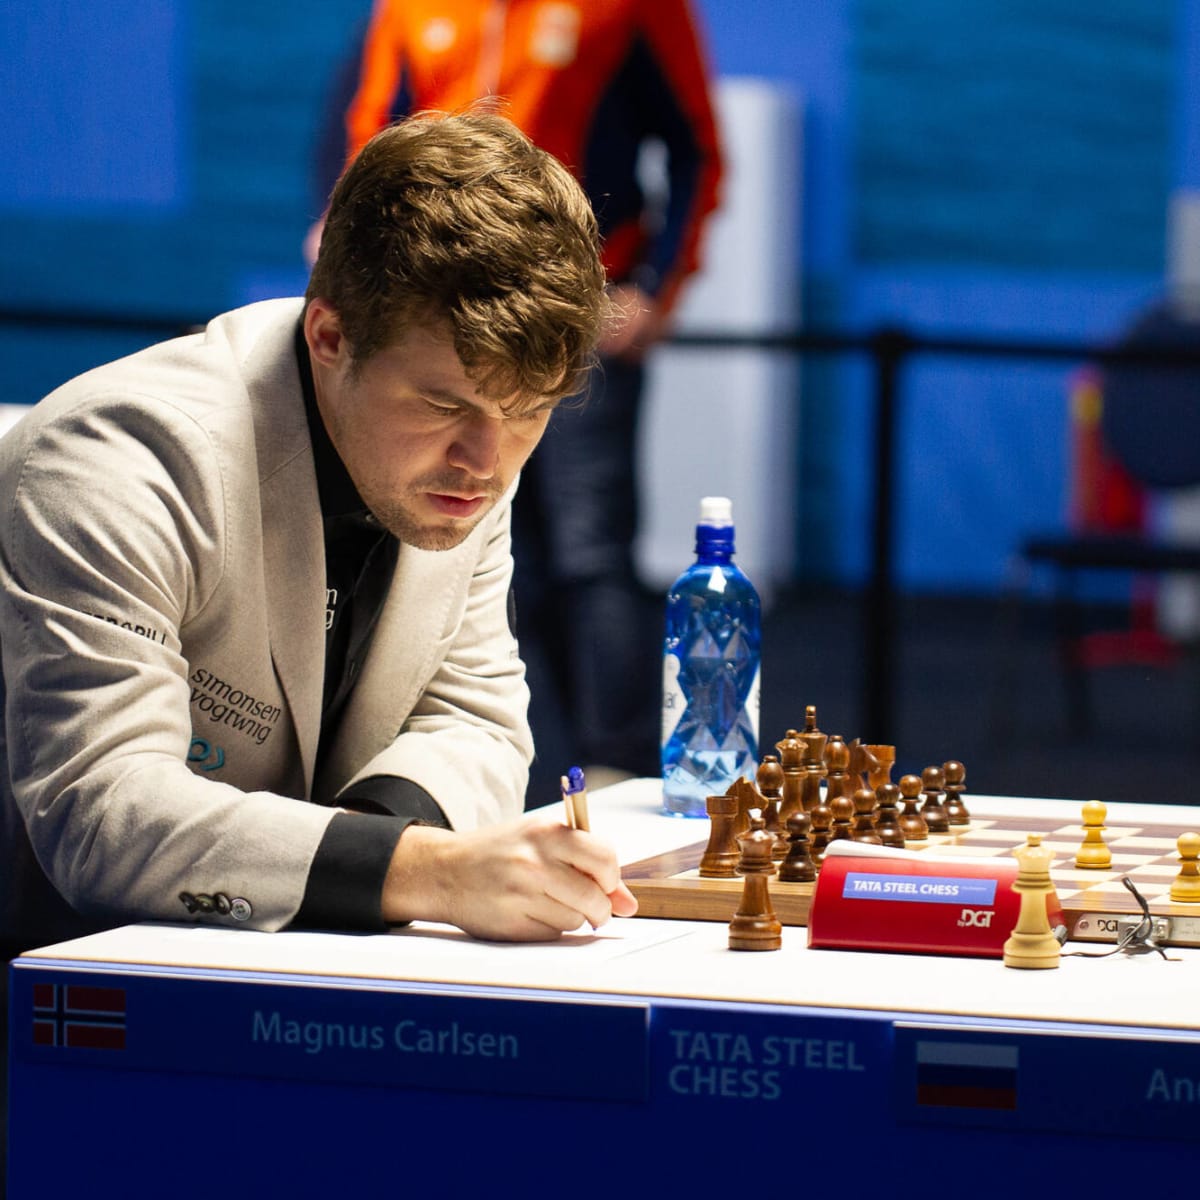 85th Tata Steel Chess 2023 Masters Round 7: Extreme decisive day 11 out of  14 games ended decisively in the seventh round. Nodirbek…